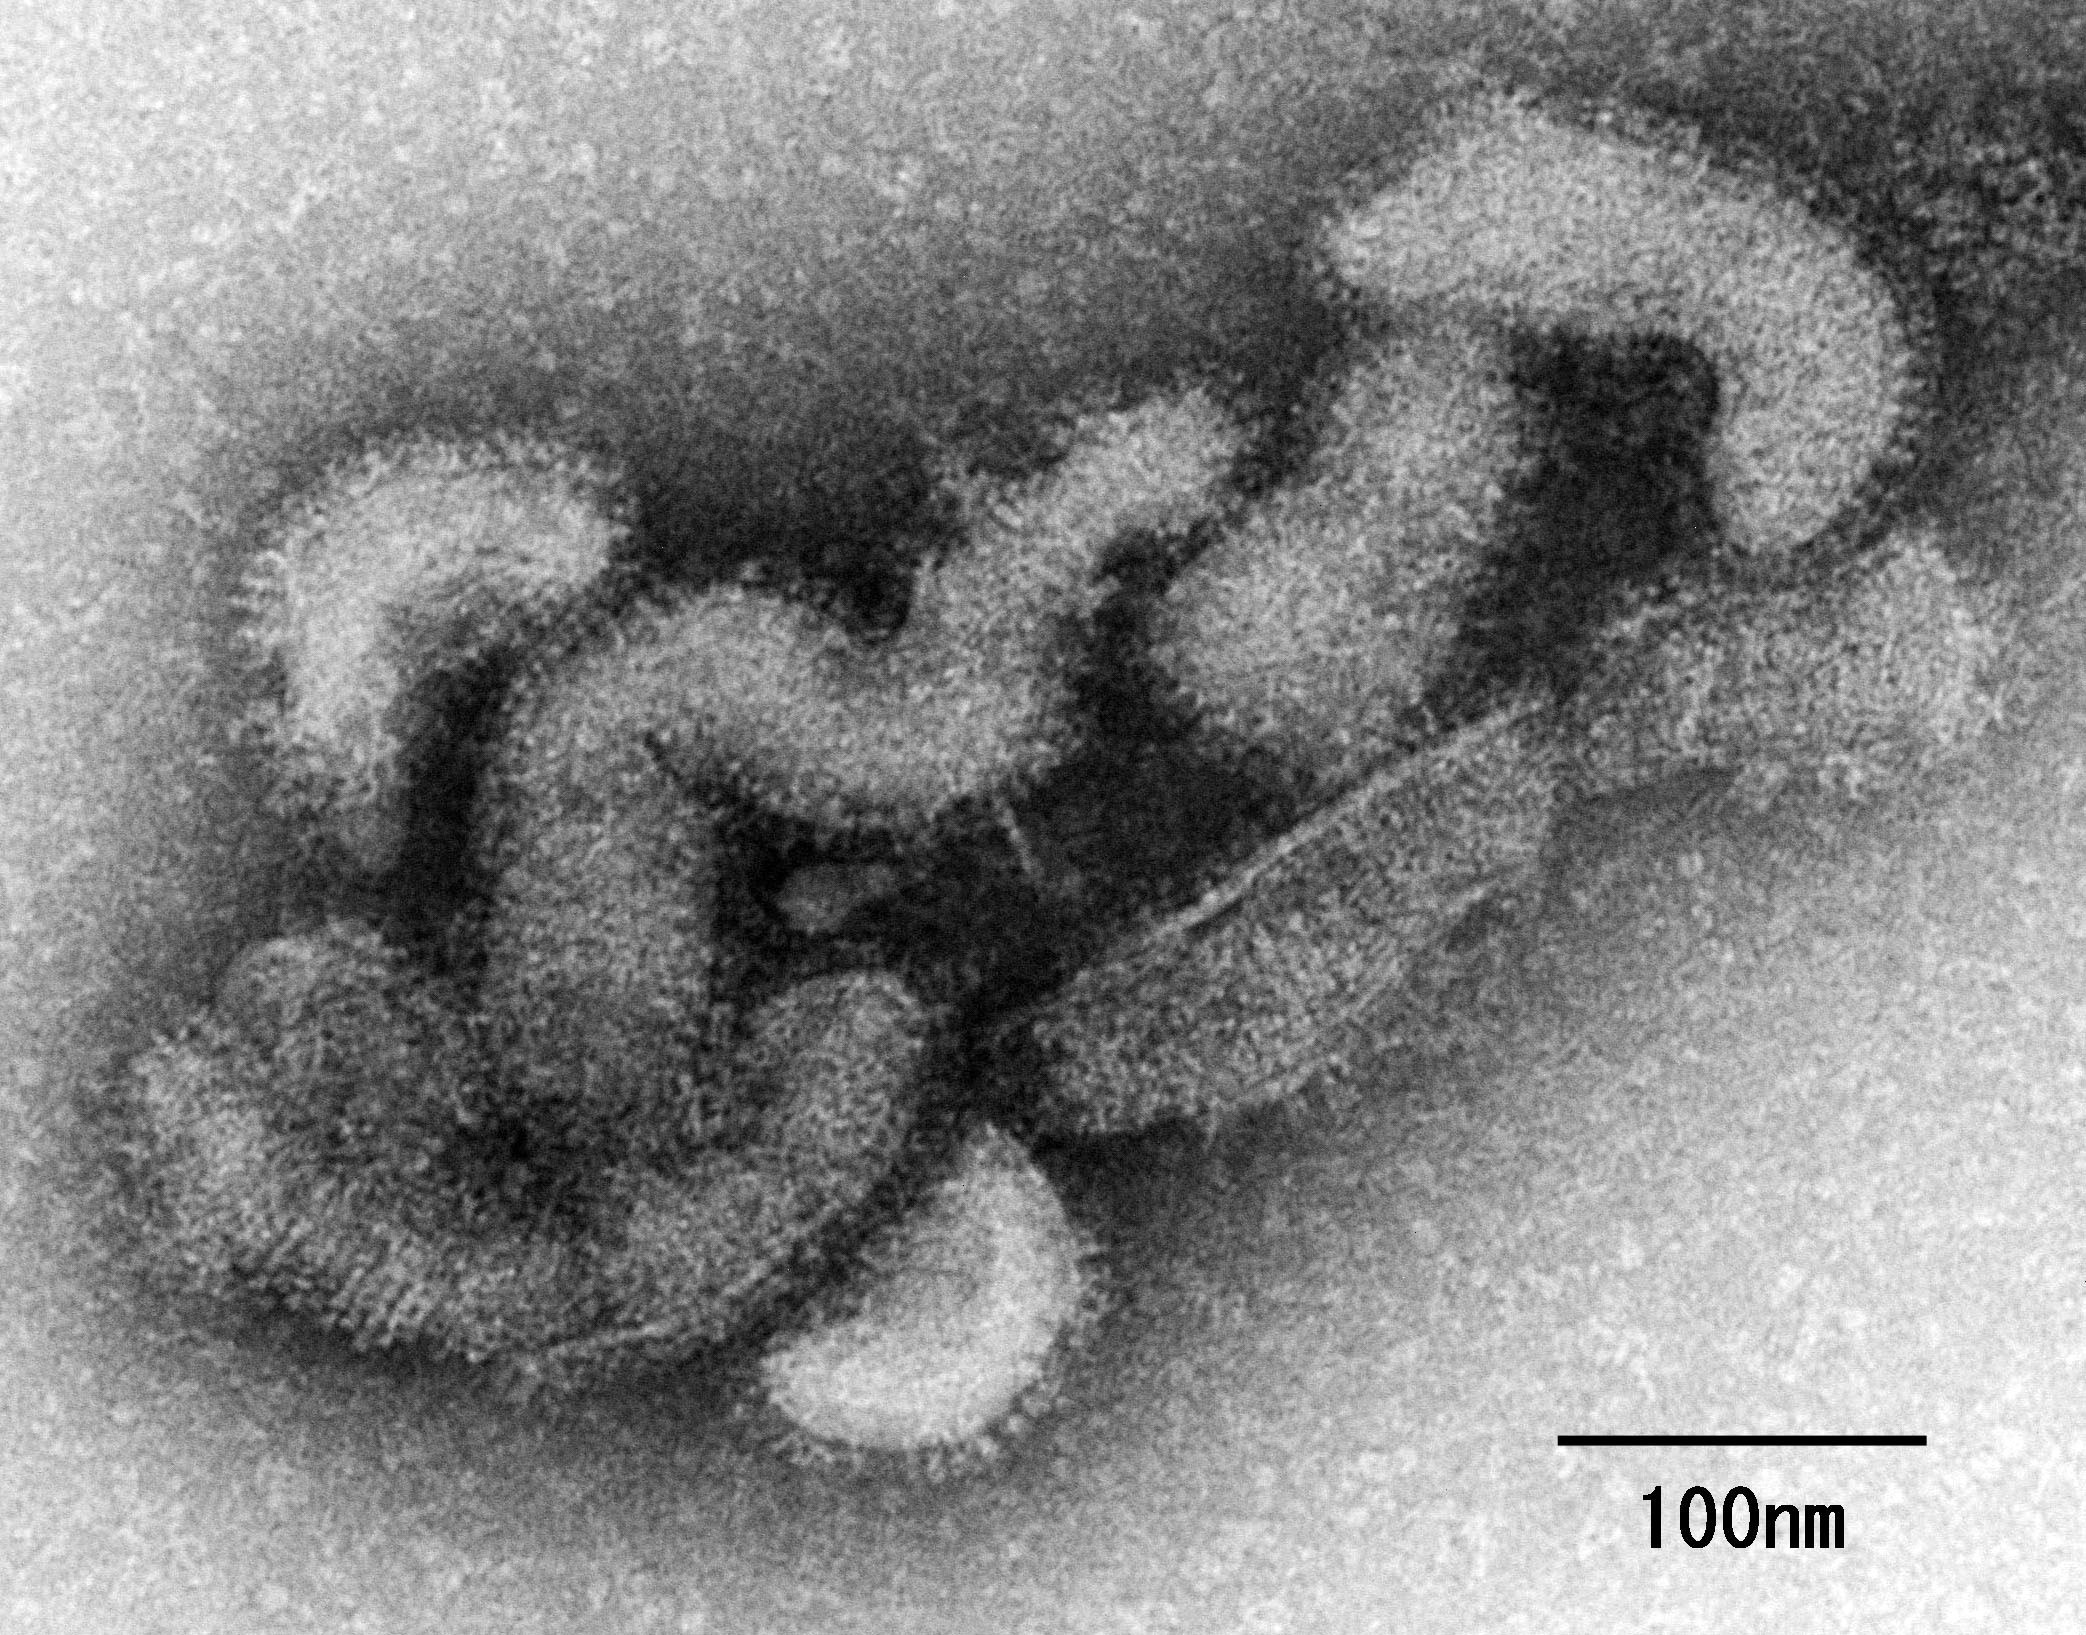 An electron micrograph of the Oz virus. Photo: EPA-EFE/National Institute of Infectious Diseases